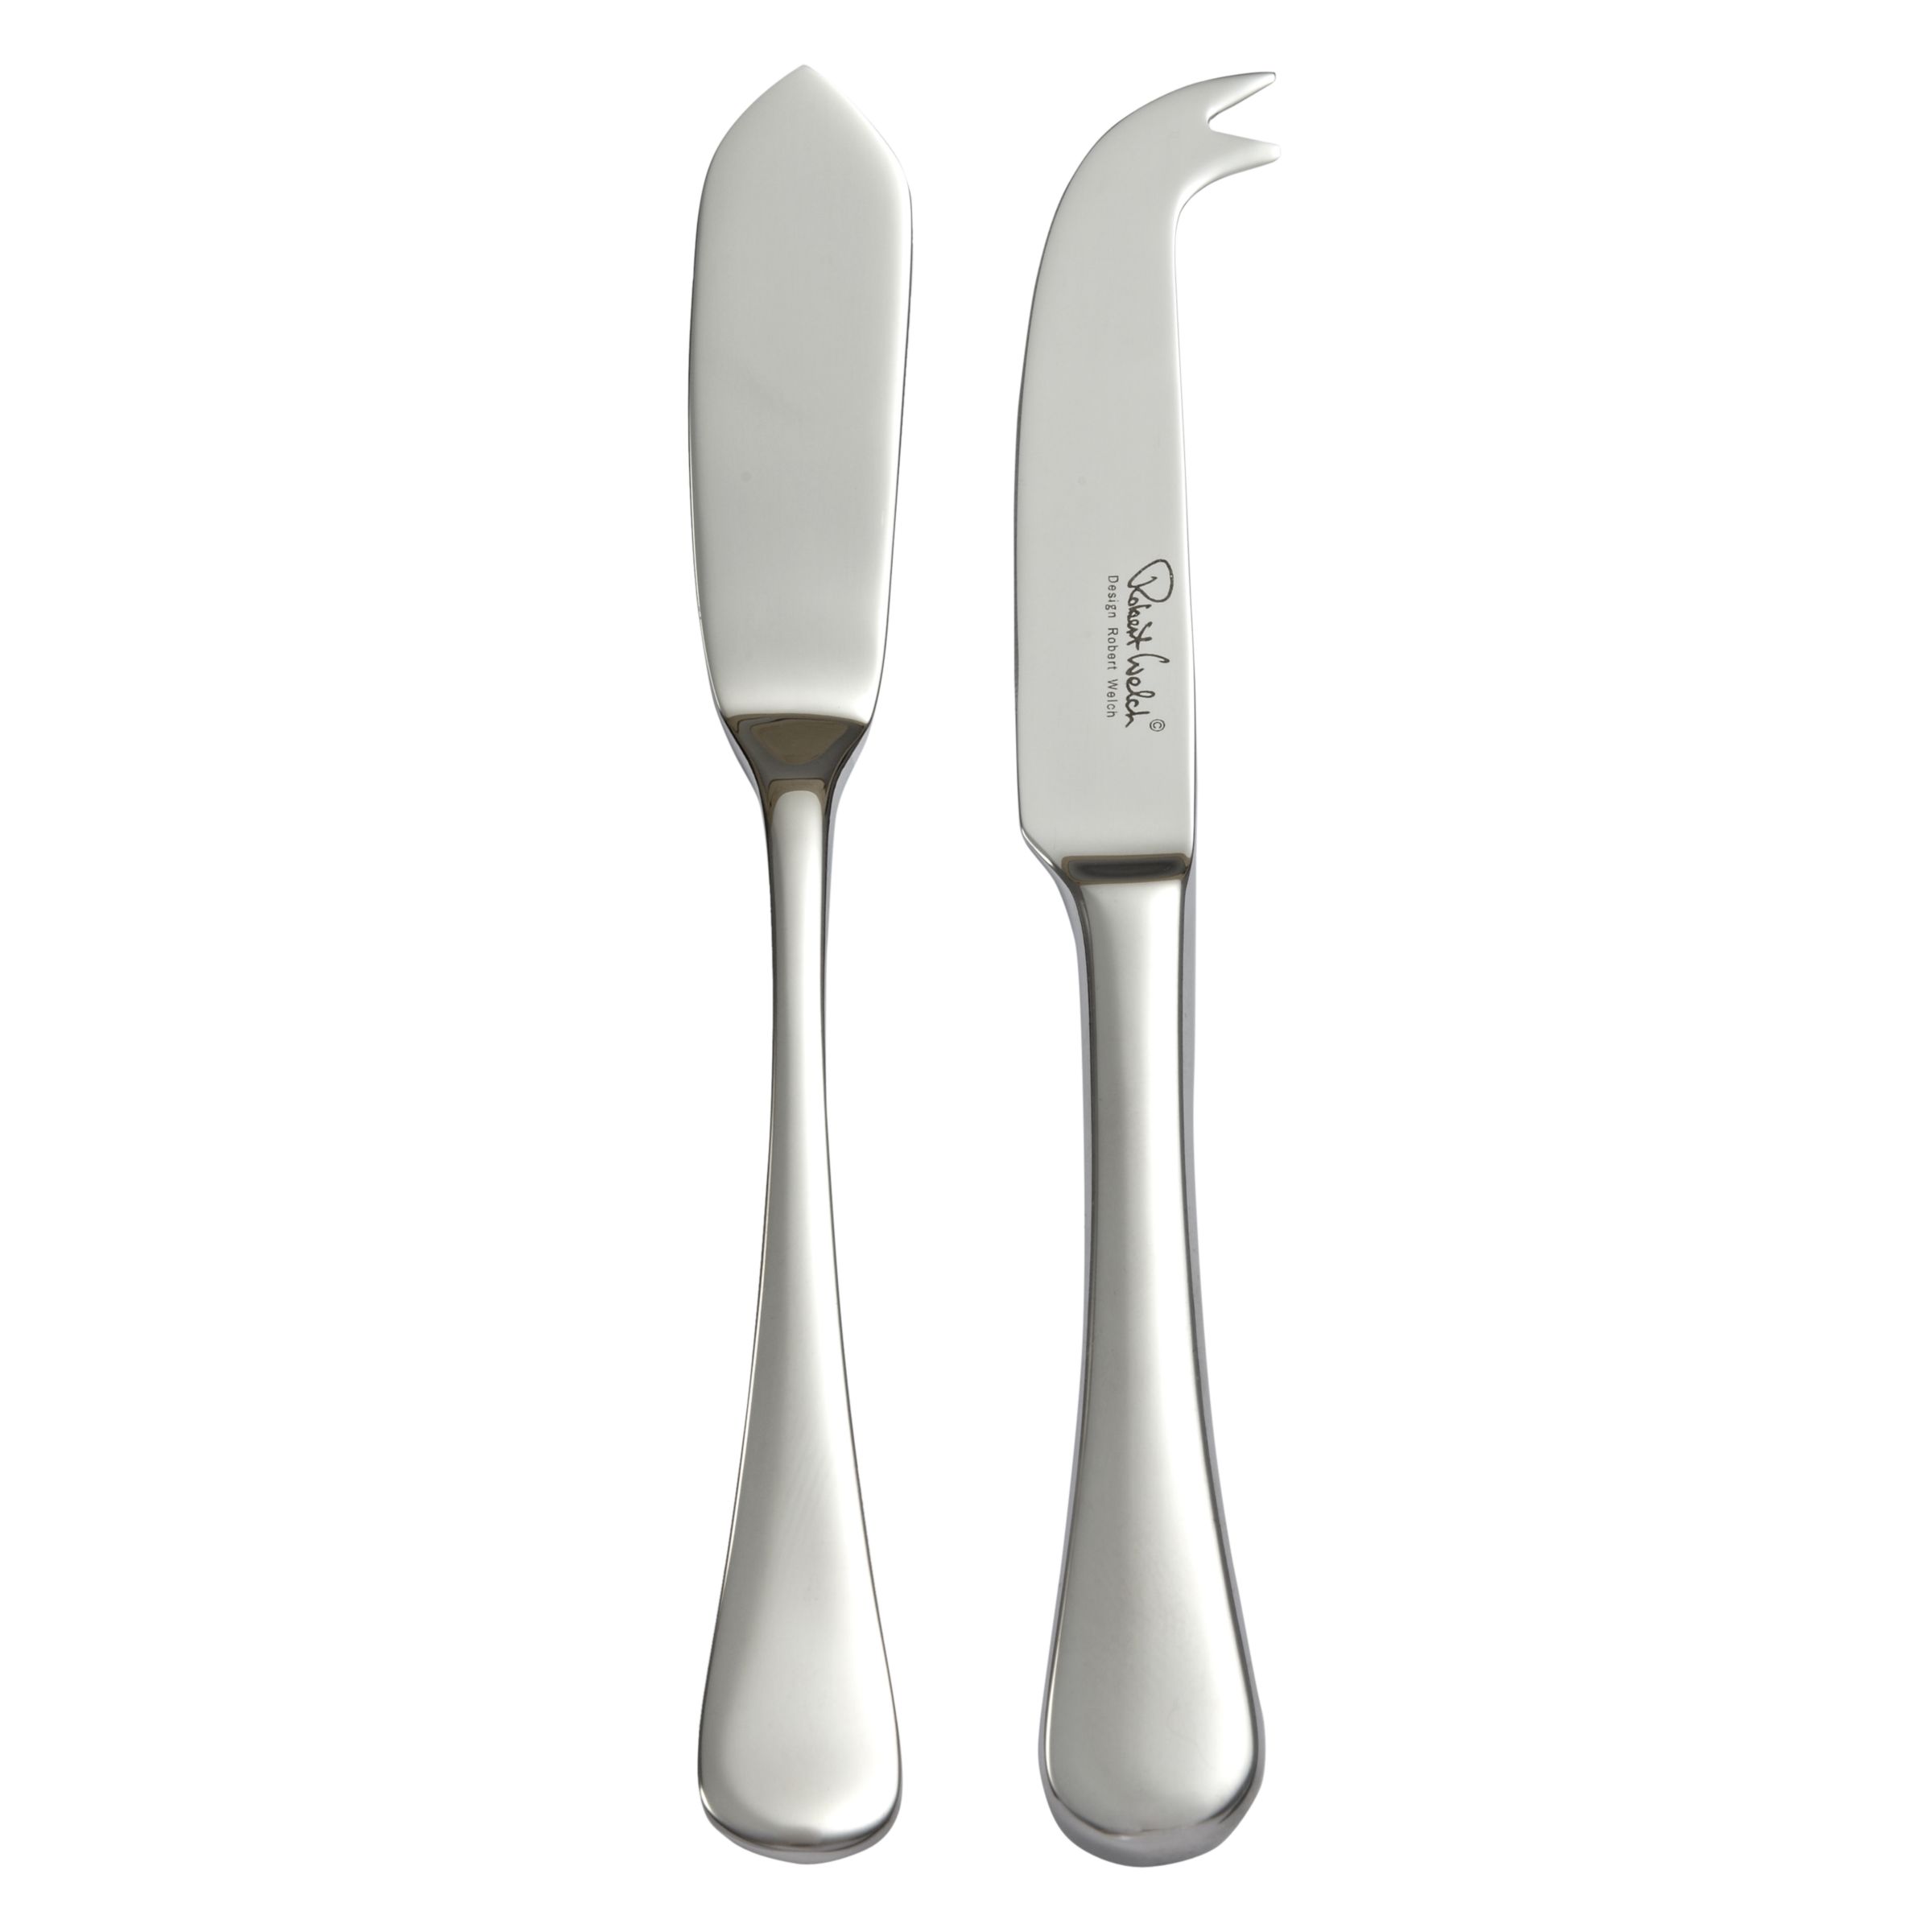 Radford Cheese and Butter Knives,